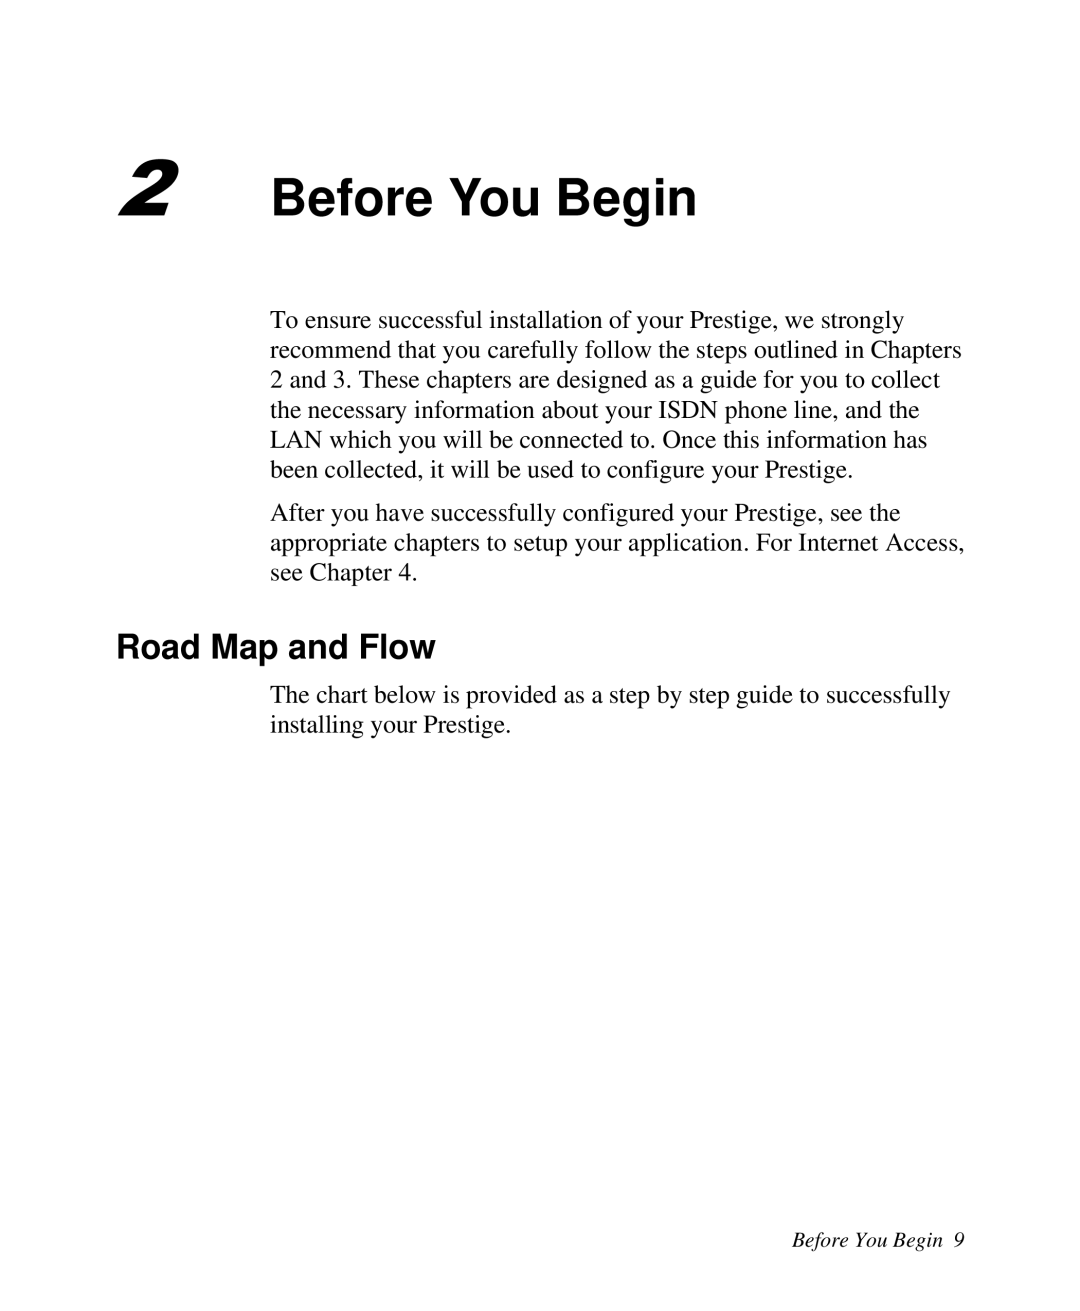 ZyXEL Communications Prestige 128 user manual Before You Begin, Road Map and Flow 